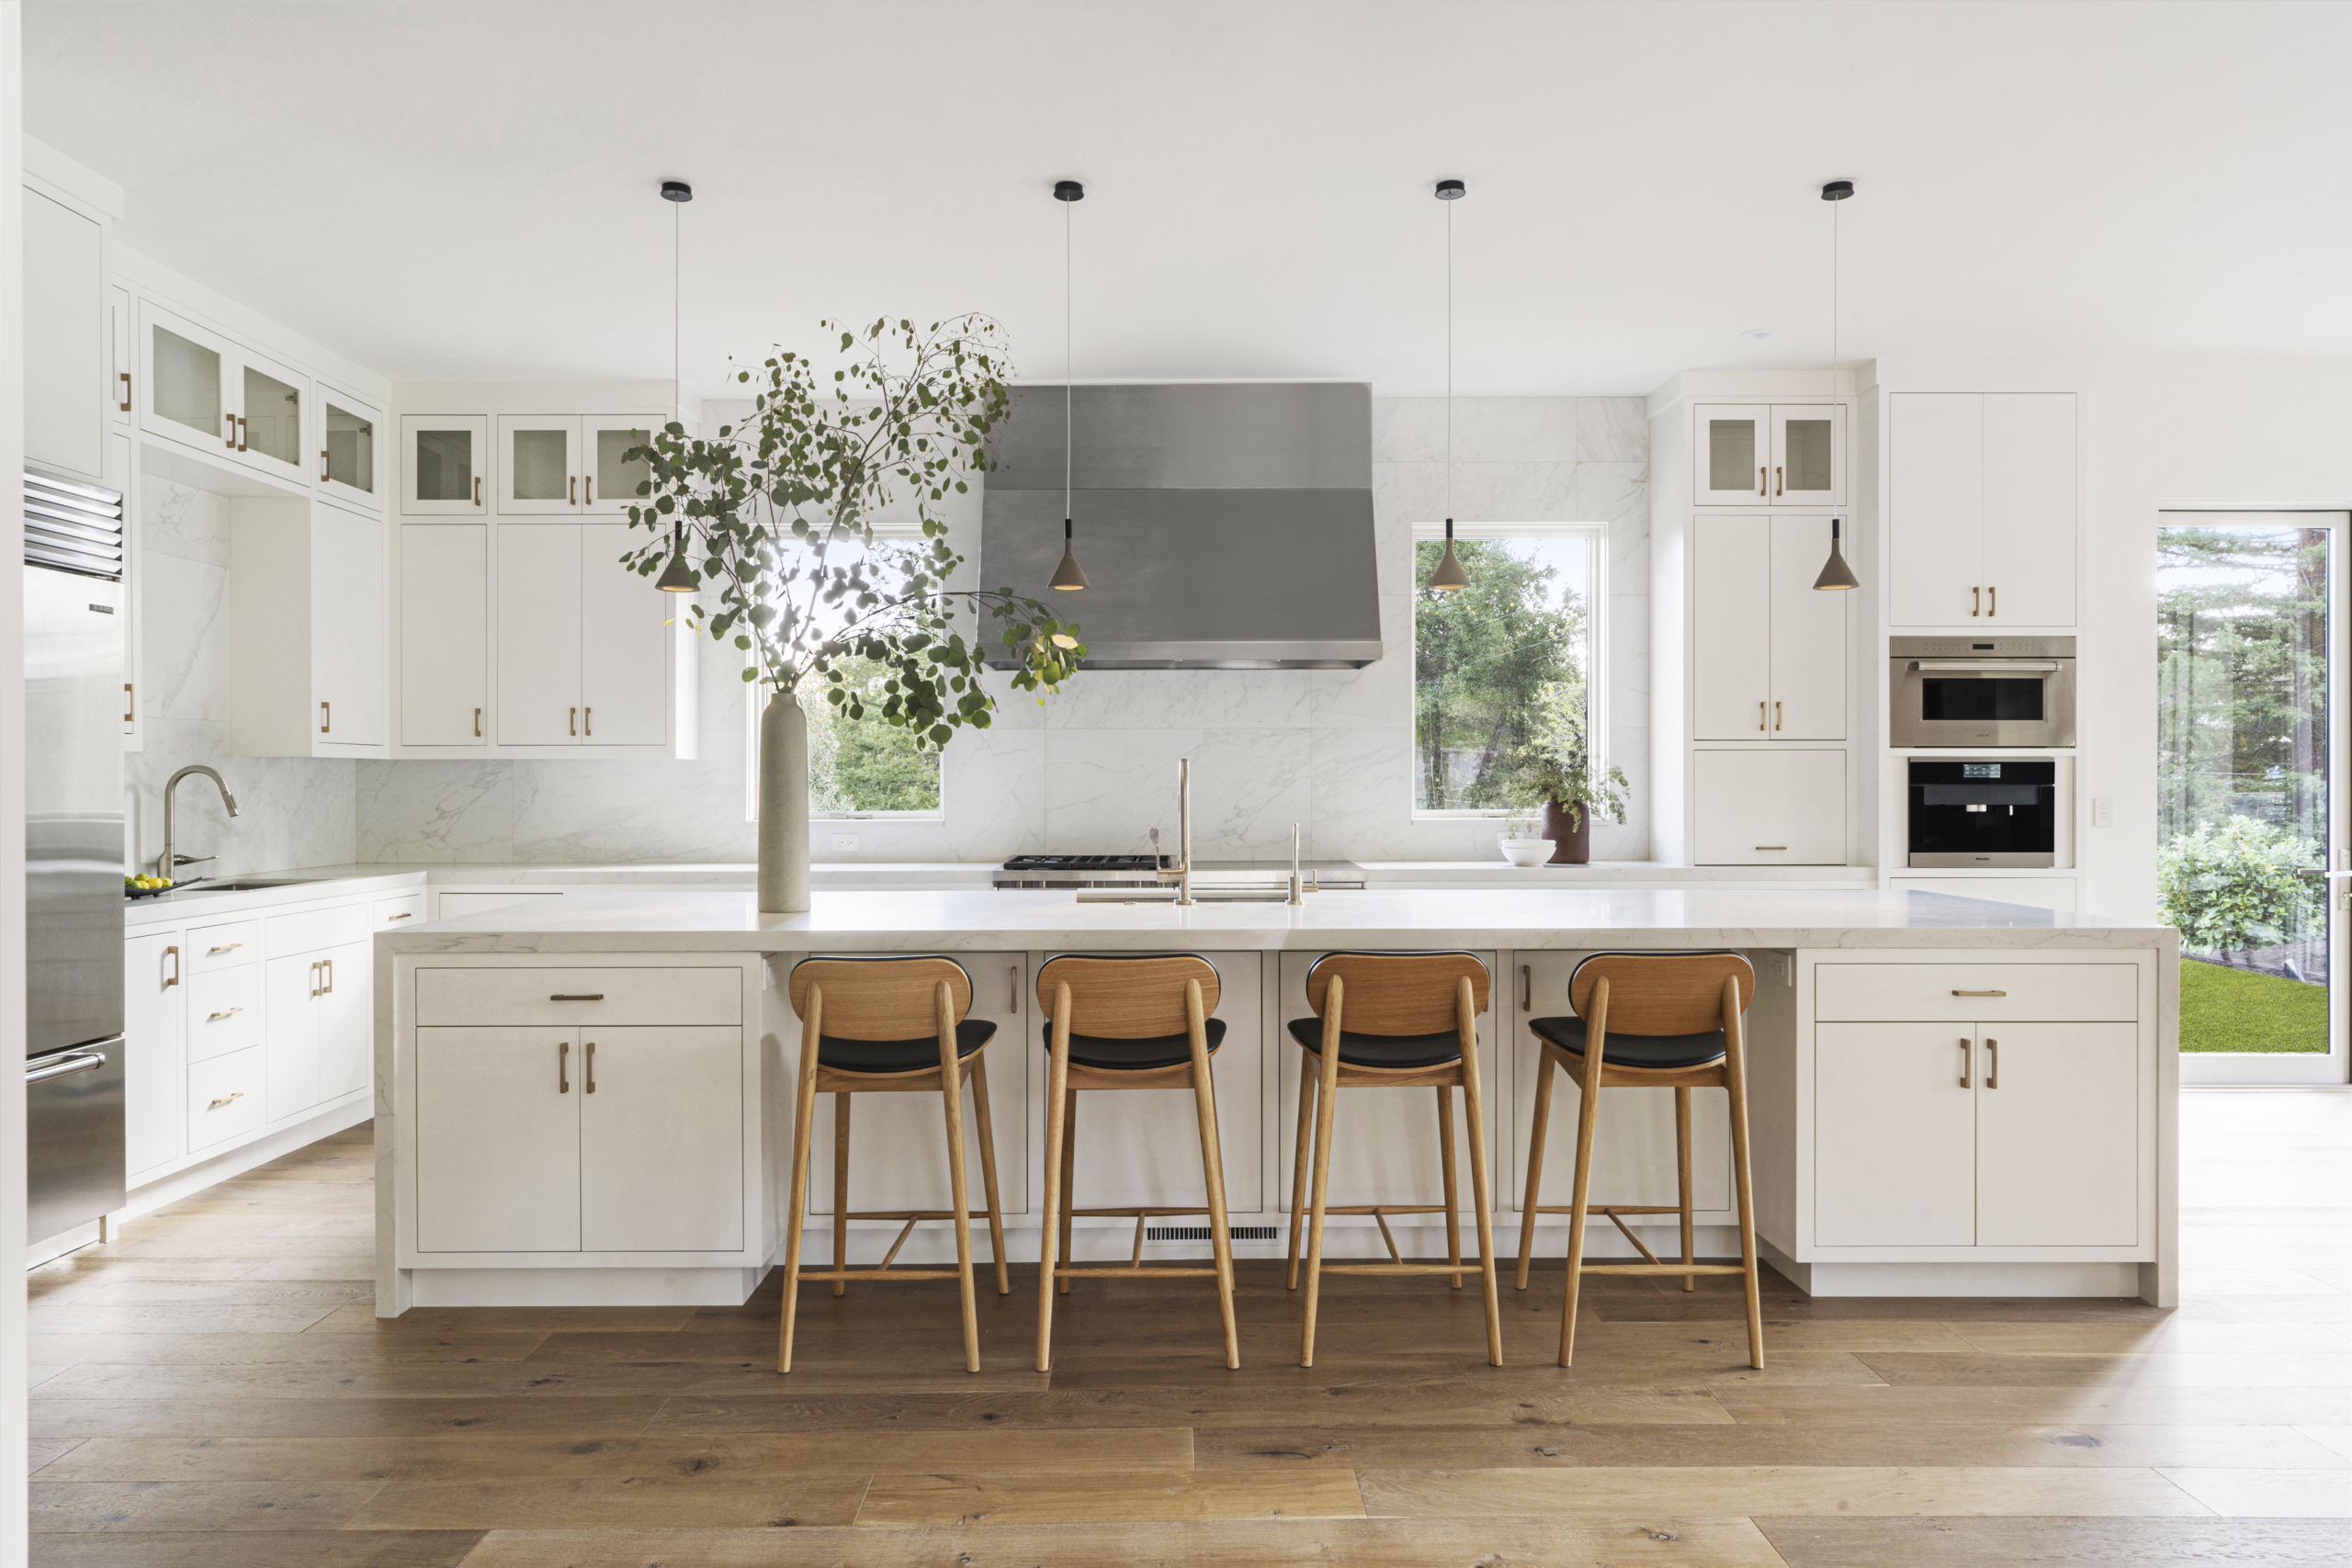 Bright white kitchen with white island and wooden stools